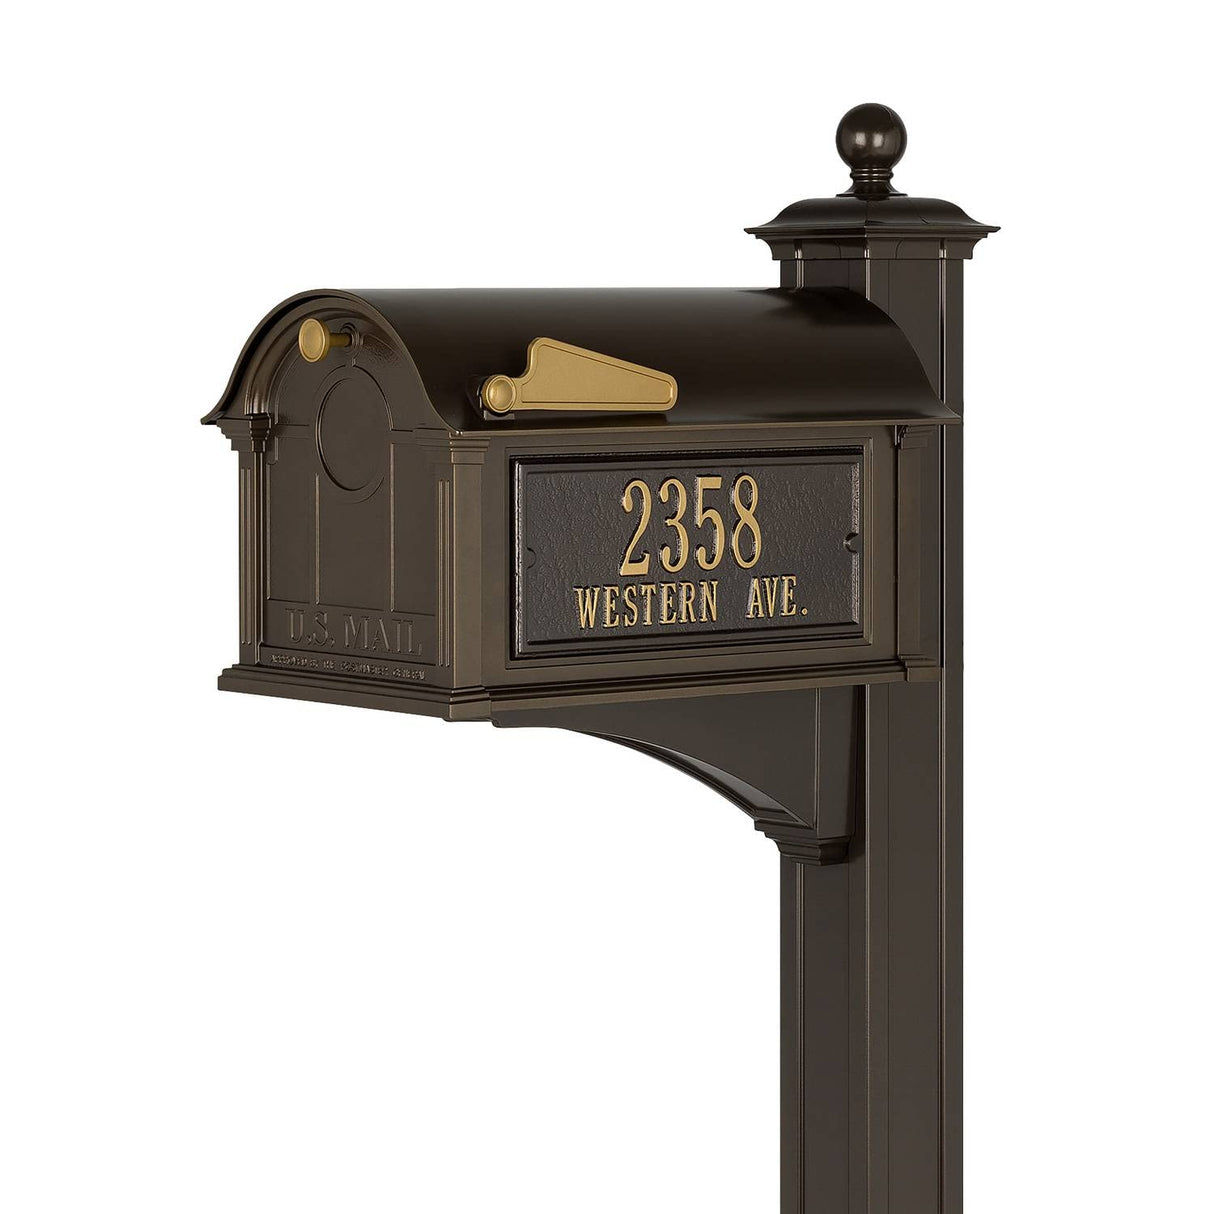 Whitehall 16369 - Balmoral Mailbox Side Plaques, Post Package - Bronze